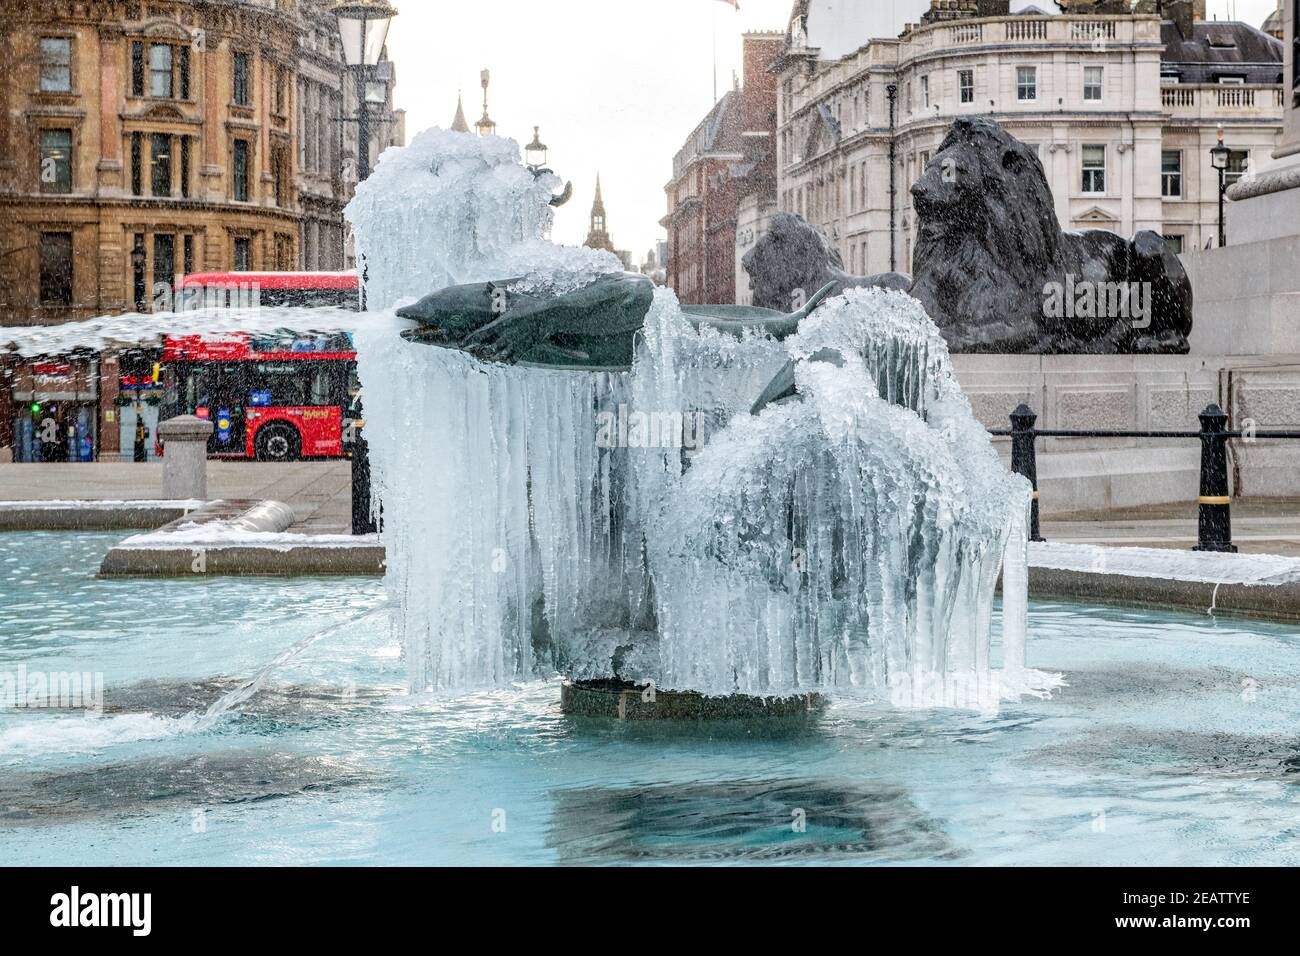 Frozen fountains in Trafalgar Square, London, England, during extreme low temperatures of Storm Darcy, Feb 2021, also called the Beast from the East. Stock Photo